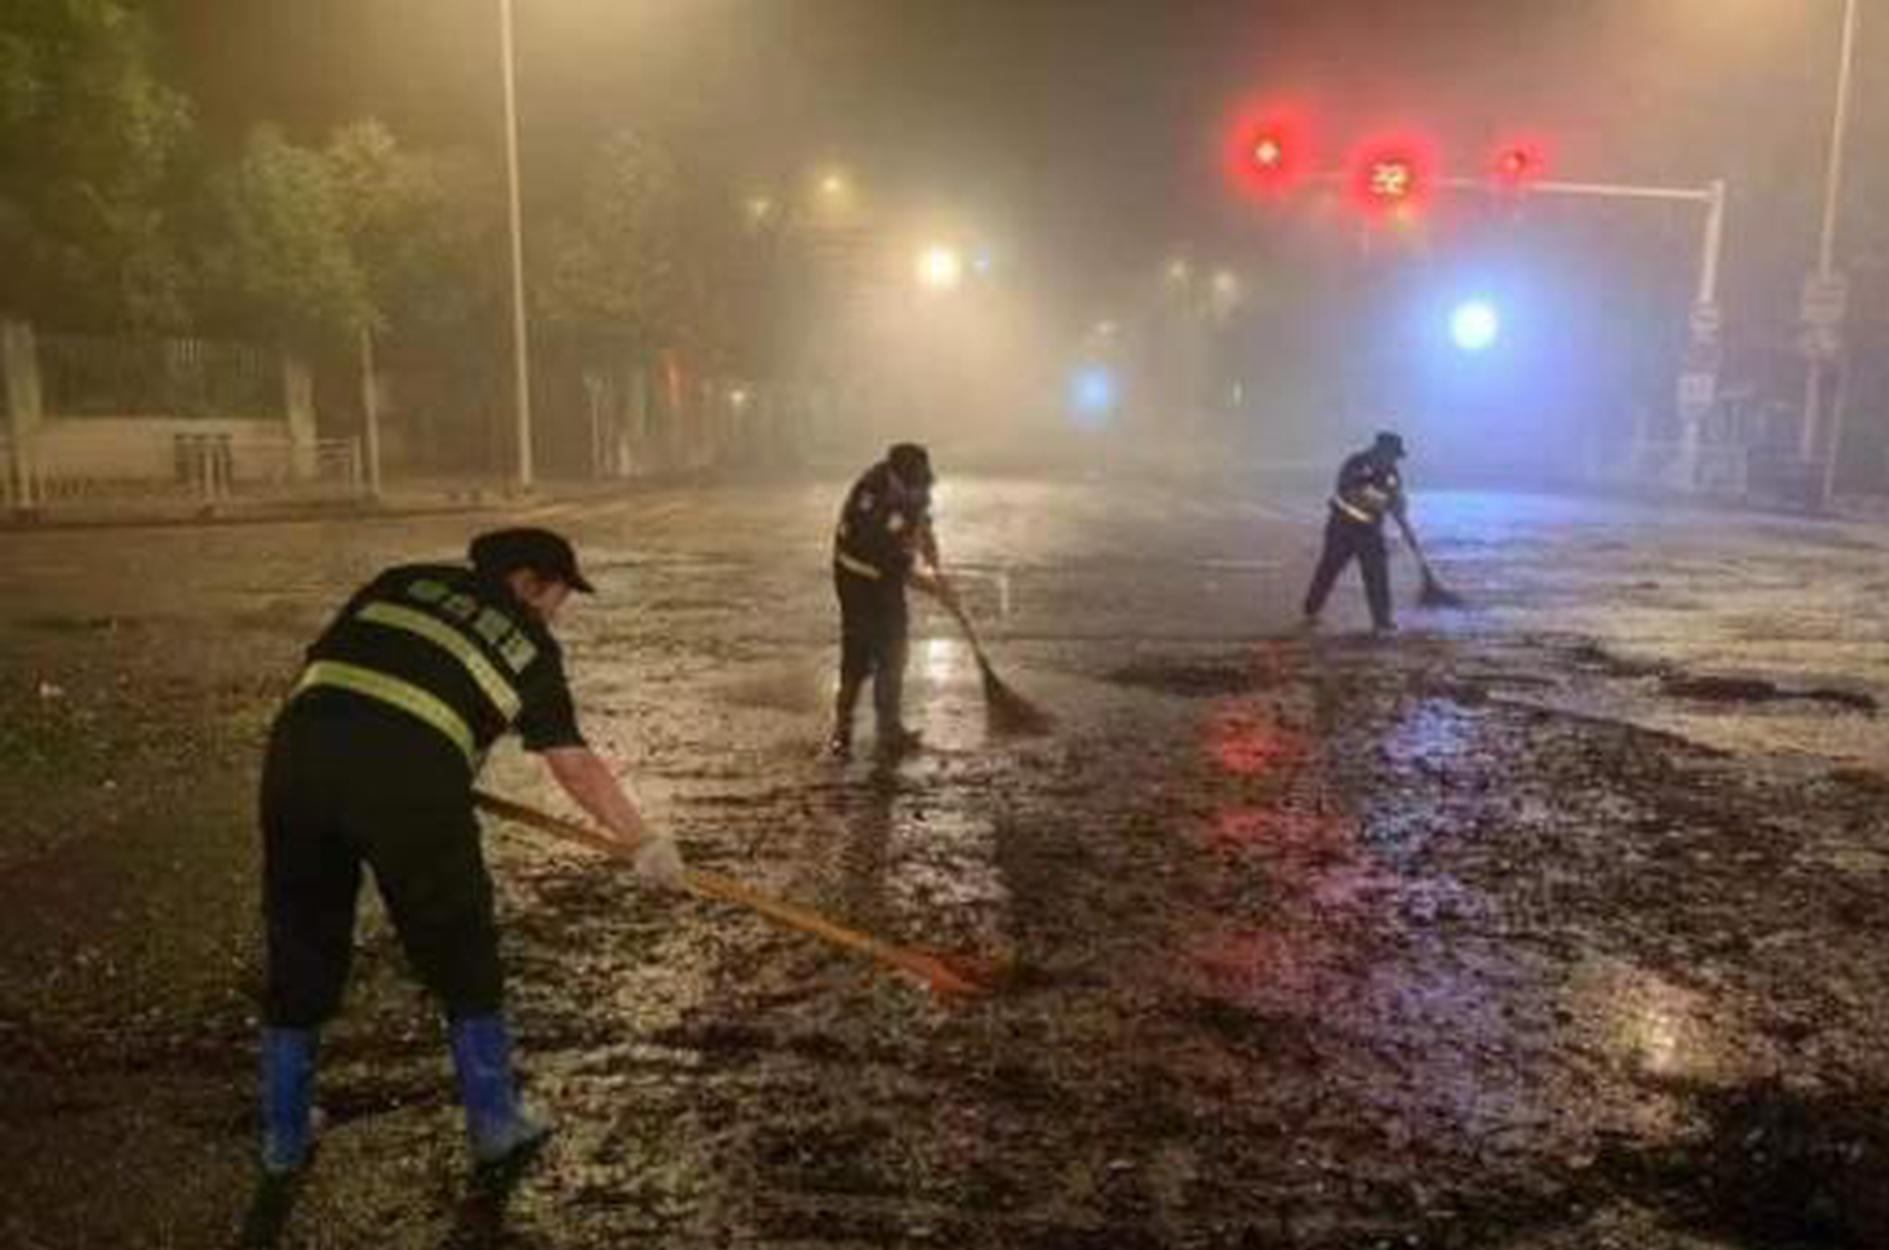 China issues yellow alert for rainstorms in multiple regions